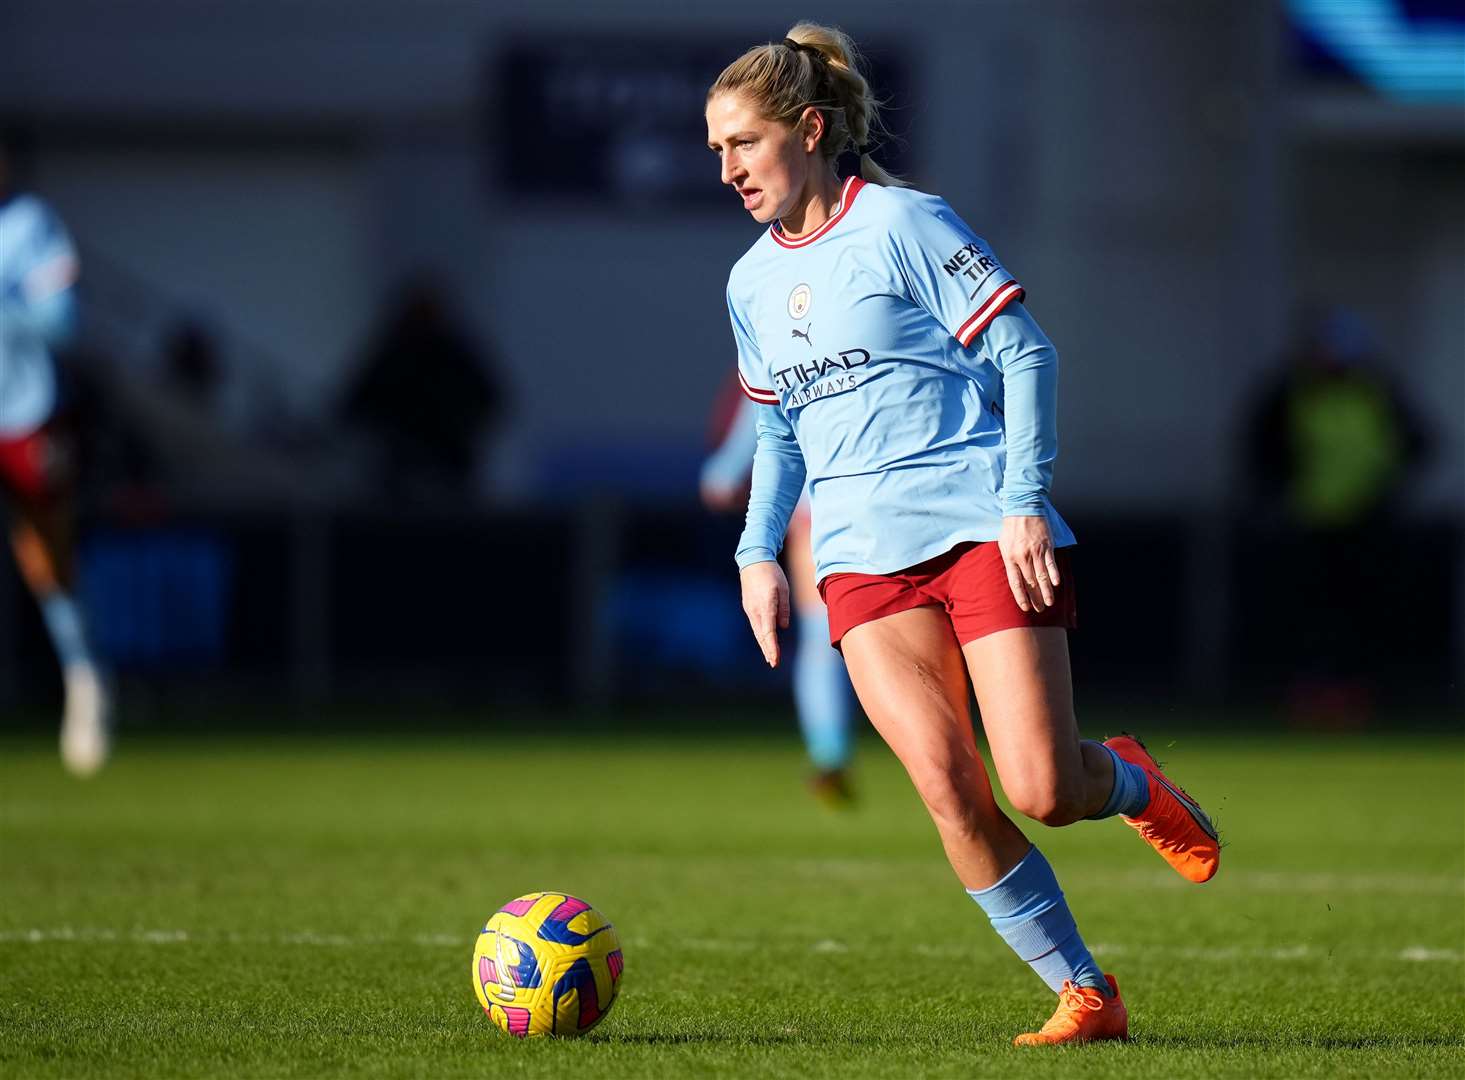 Gravesend-born Man City midfielder Laura Coombs came off the bench to claim an assist against China too. PictureL Manchester City FC